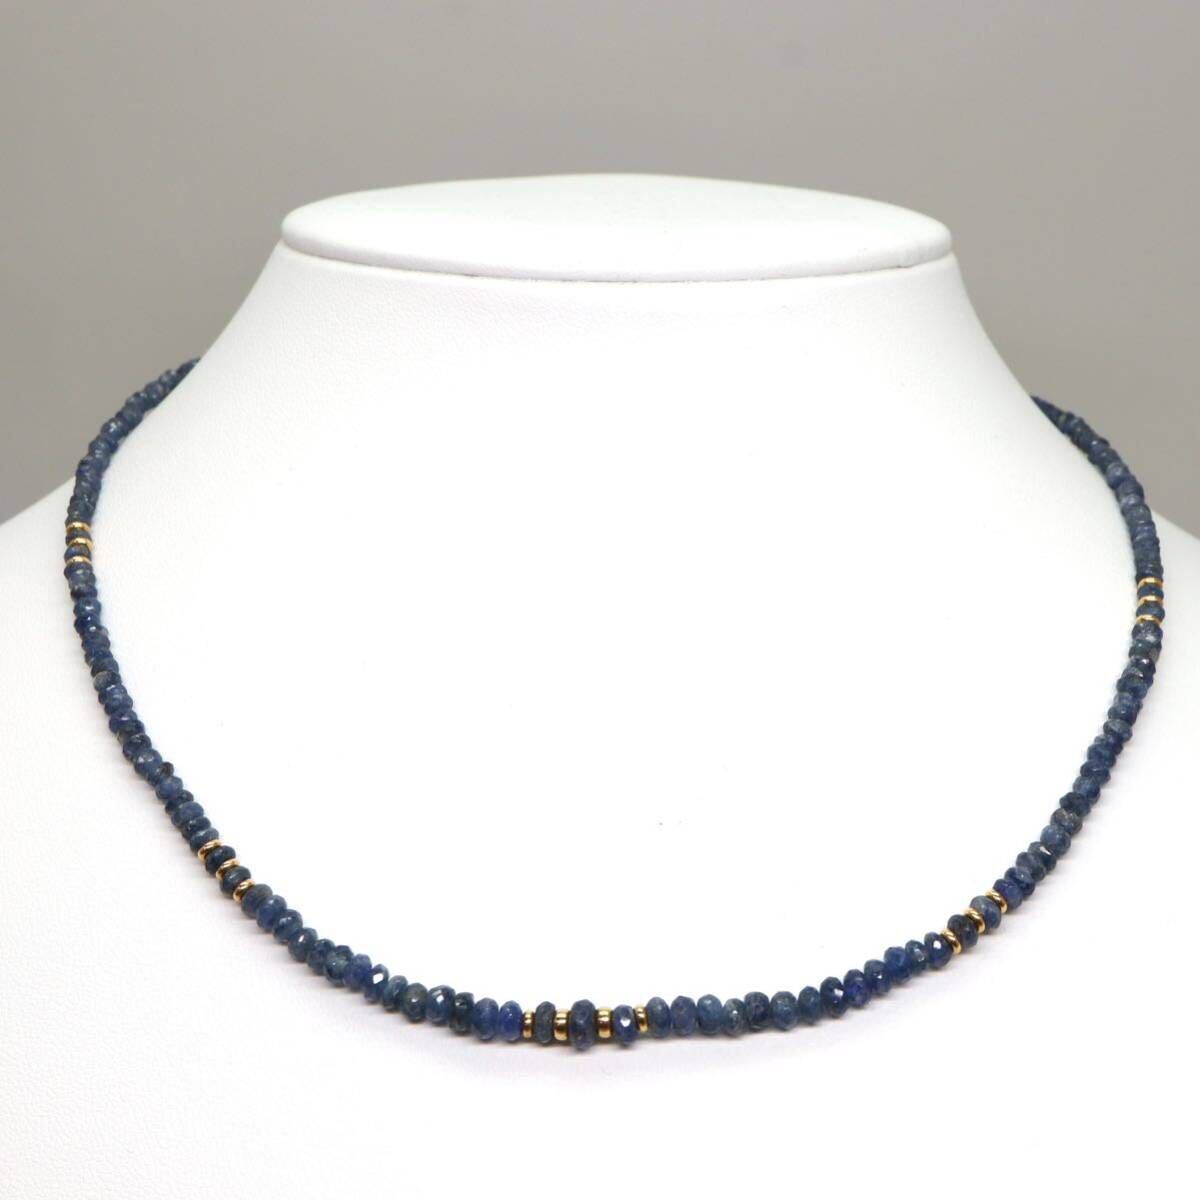 ◆K18 天然サファイア ネックレス◆M 約9.1g 約43.0cm sapphire jewelry necklace ジュエリー EA0/EA2_画像2